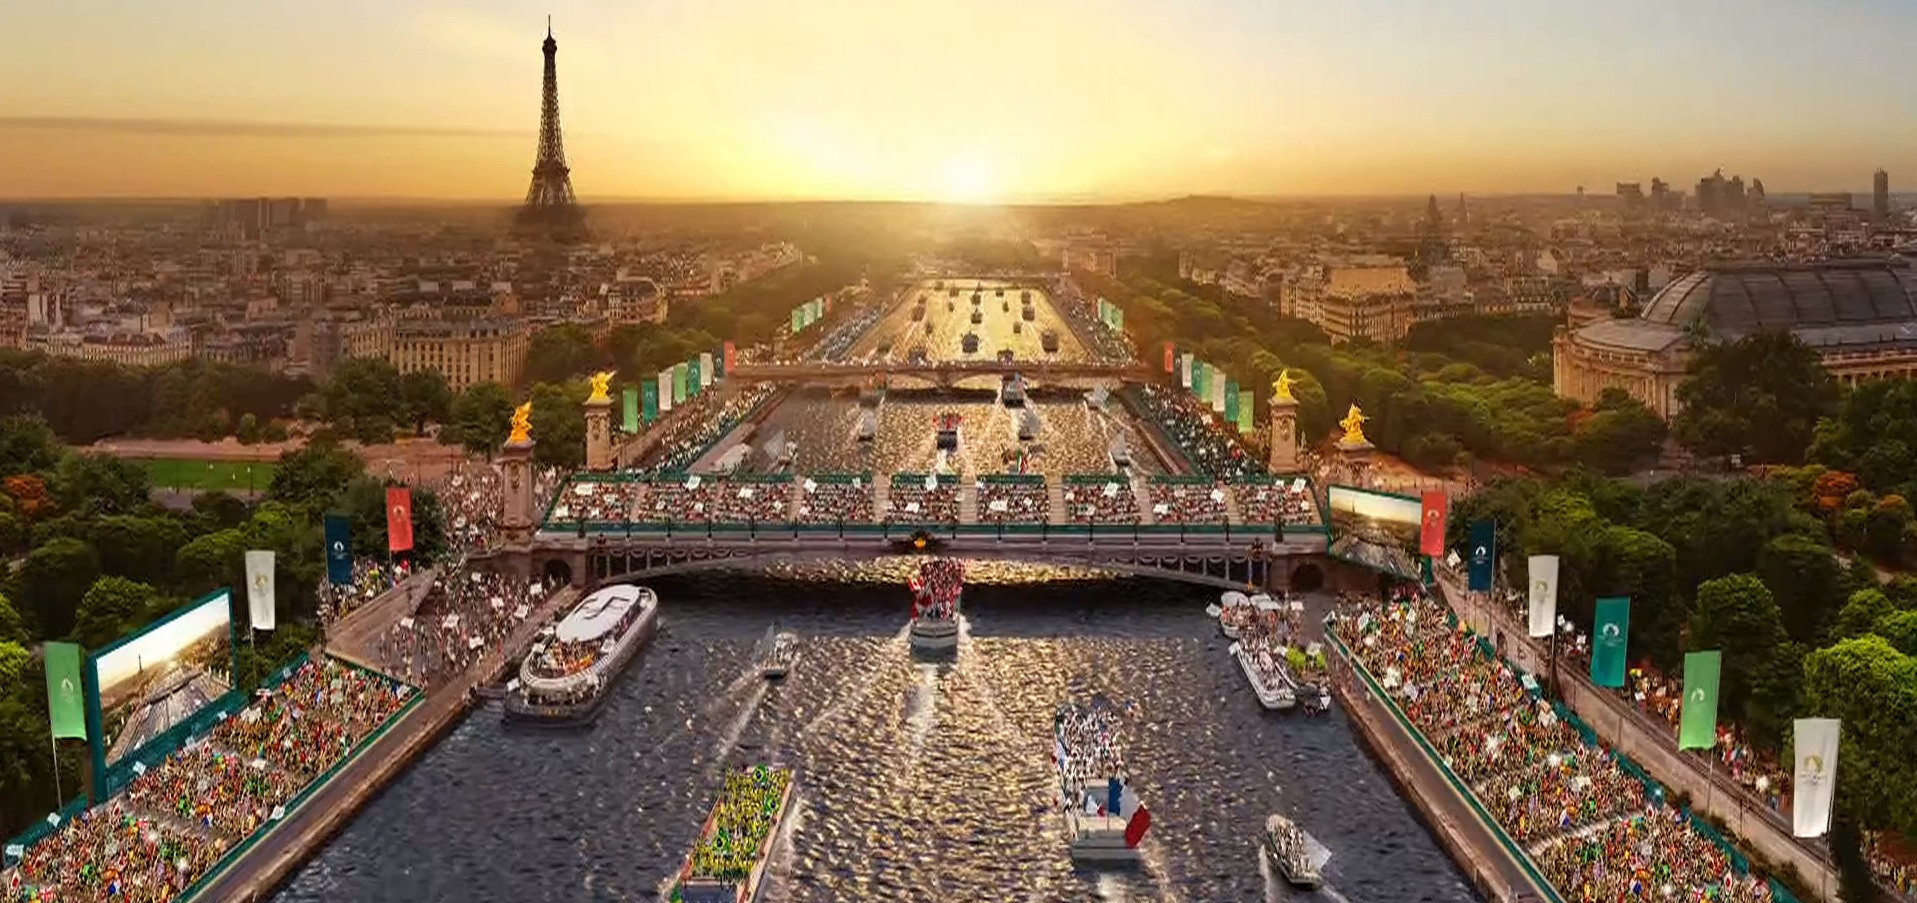 Paris 2024 is planning to stage the Opening Ceremony of the Olympics on the River Seine ©Paris 2024